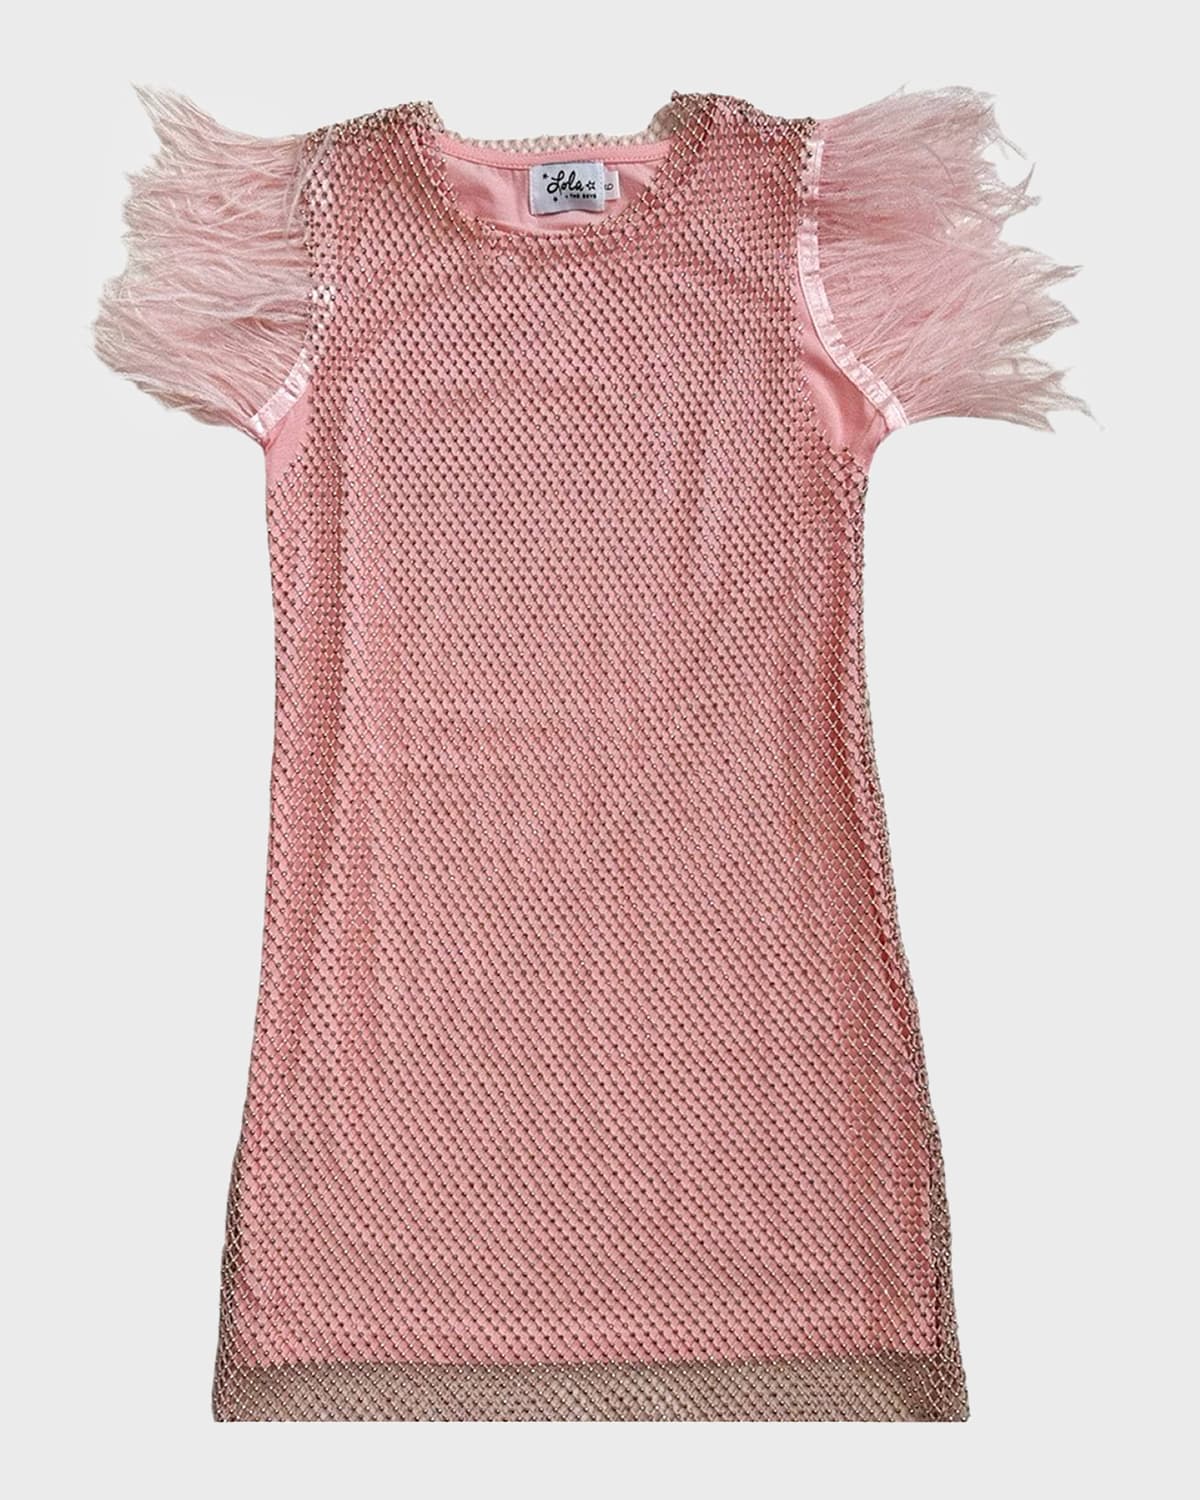 Lola + The Boys Kids' Girl's Crystal Feather Trims Sequin Dress In Pink